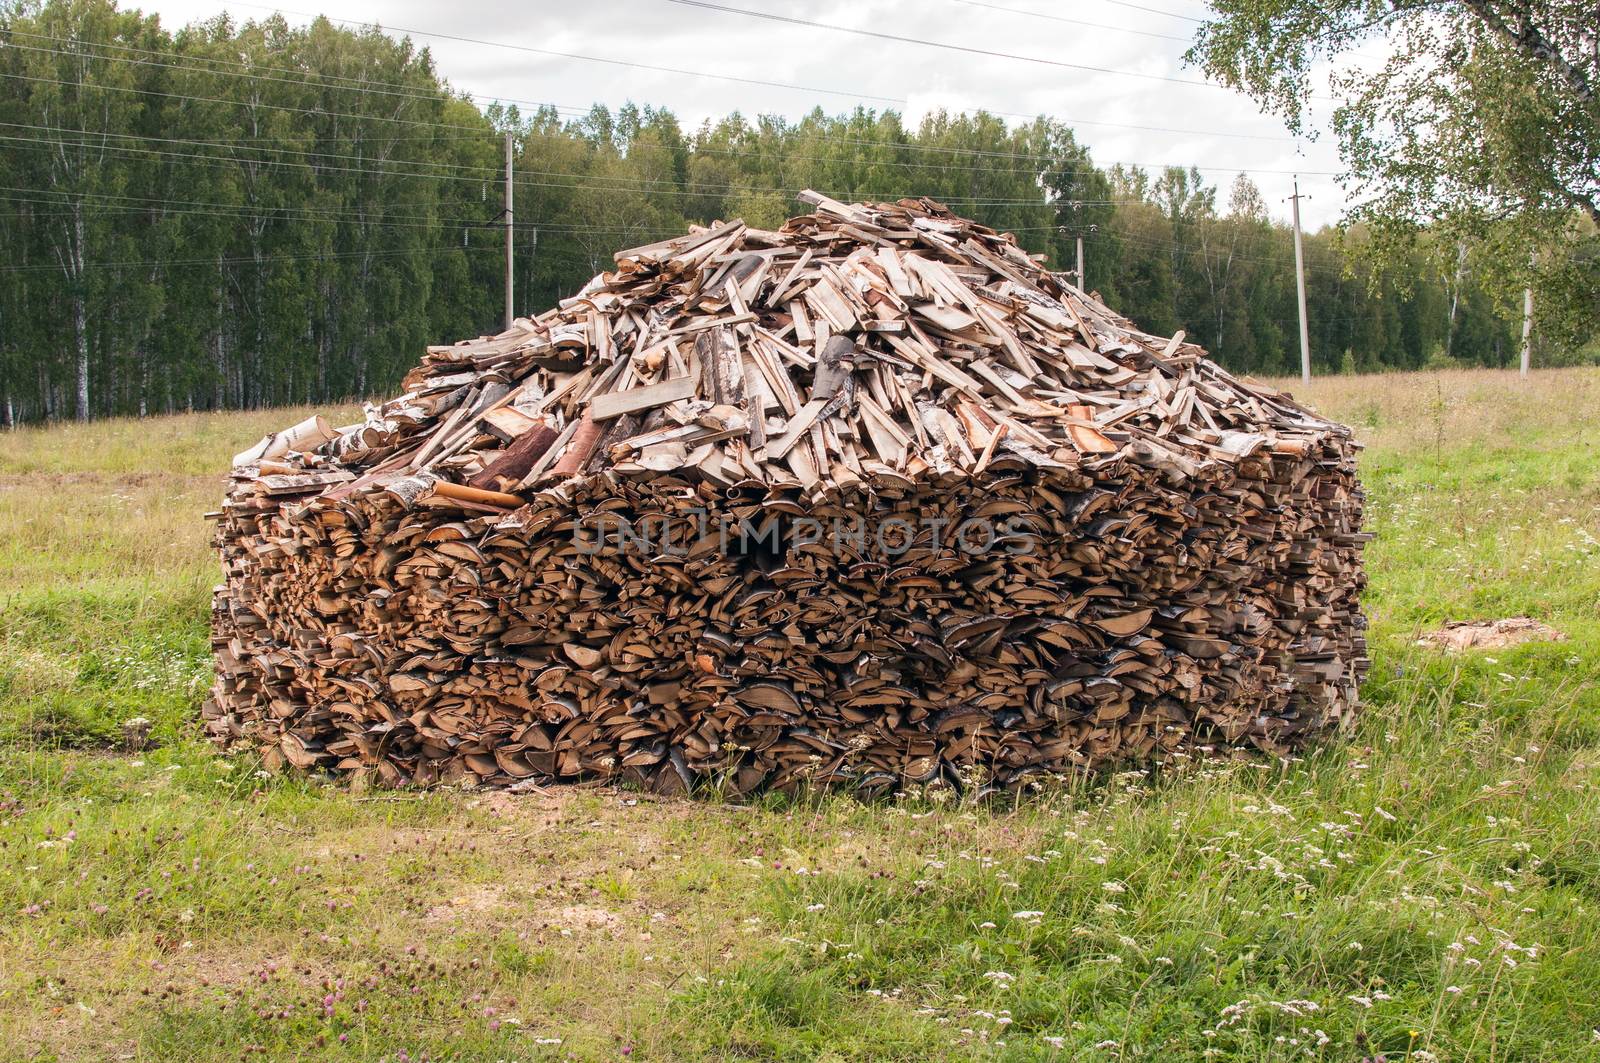 A Stack of Cleaving Birch Firewood in a Forest Glade on the Village Outskirts, Western Siberia, Russia